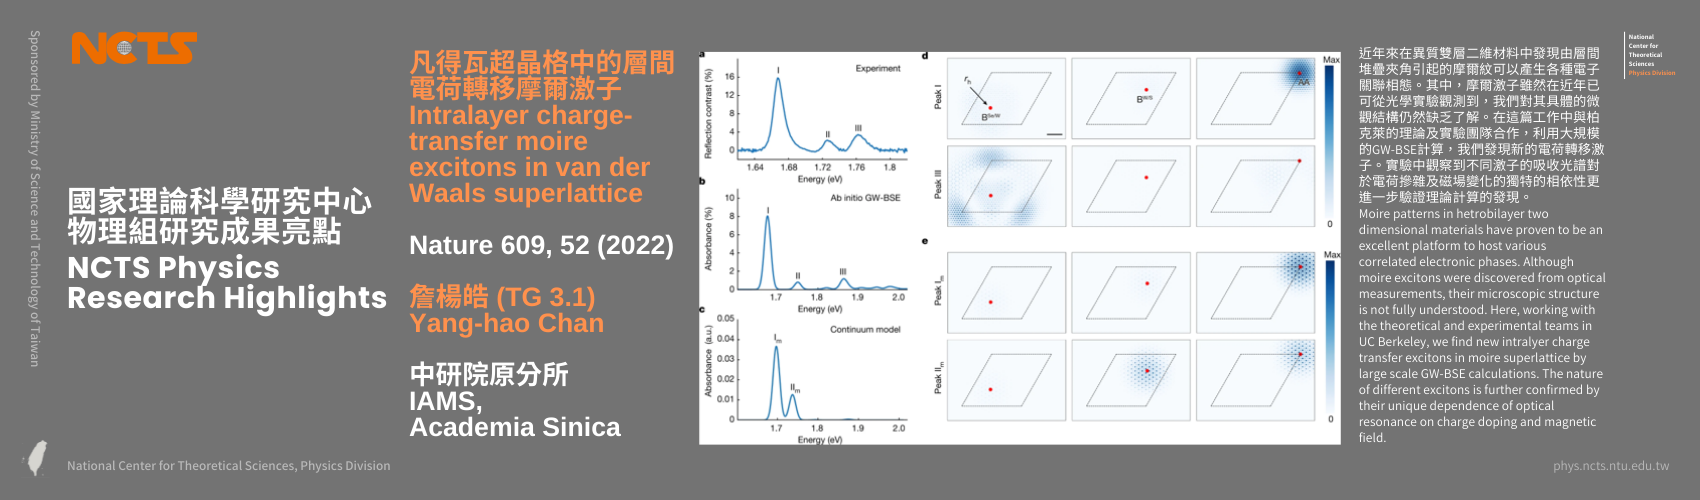 [NCTS Physics Research Highlights] Yang-hao Chan 'Intralayer charge-transfer moire excitons in van der Waals superlattice', Nature 609, 52 (2022)